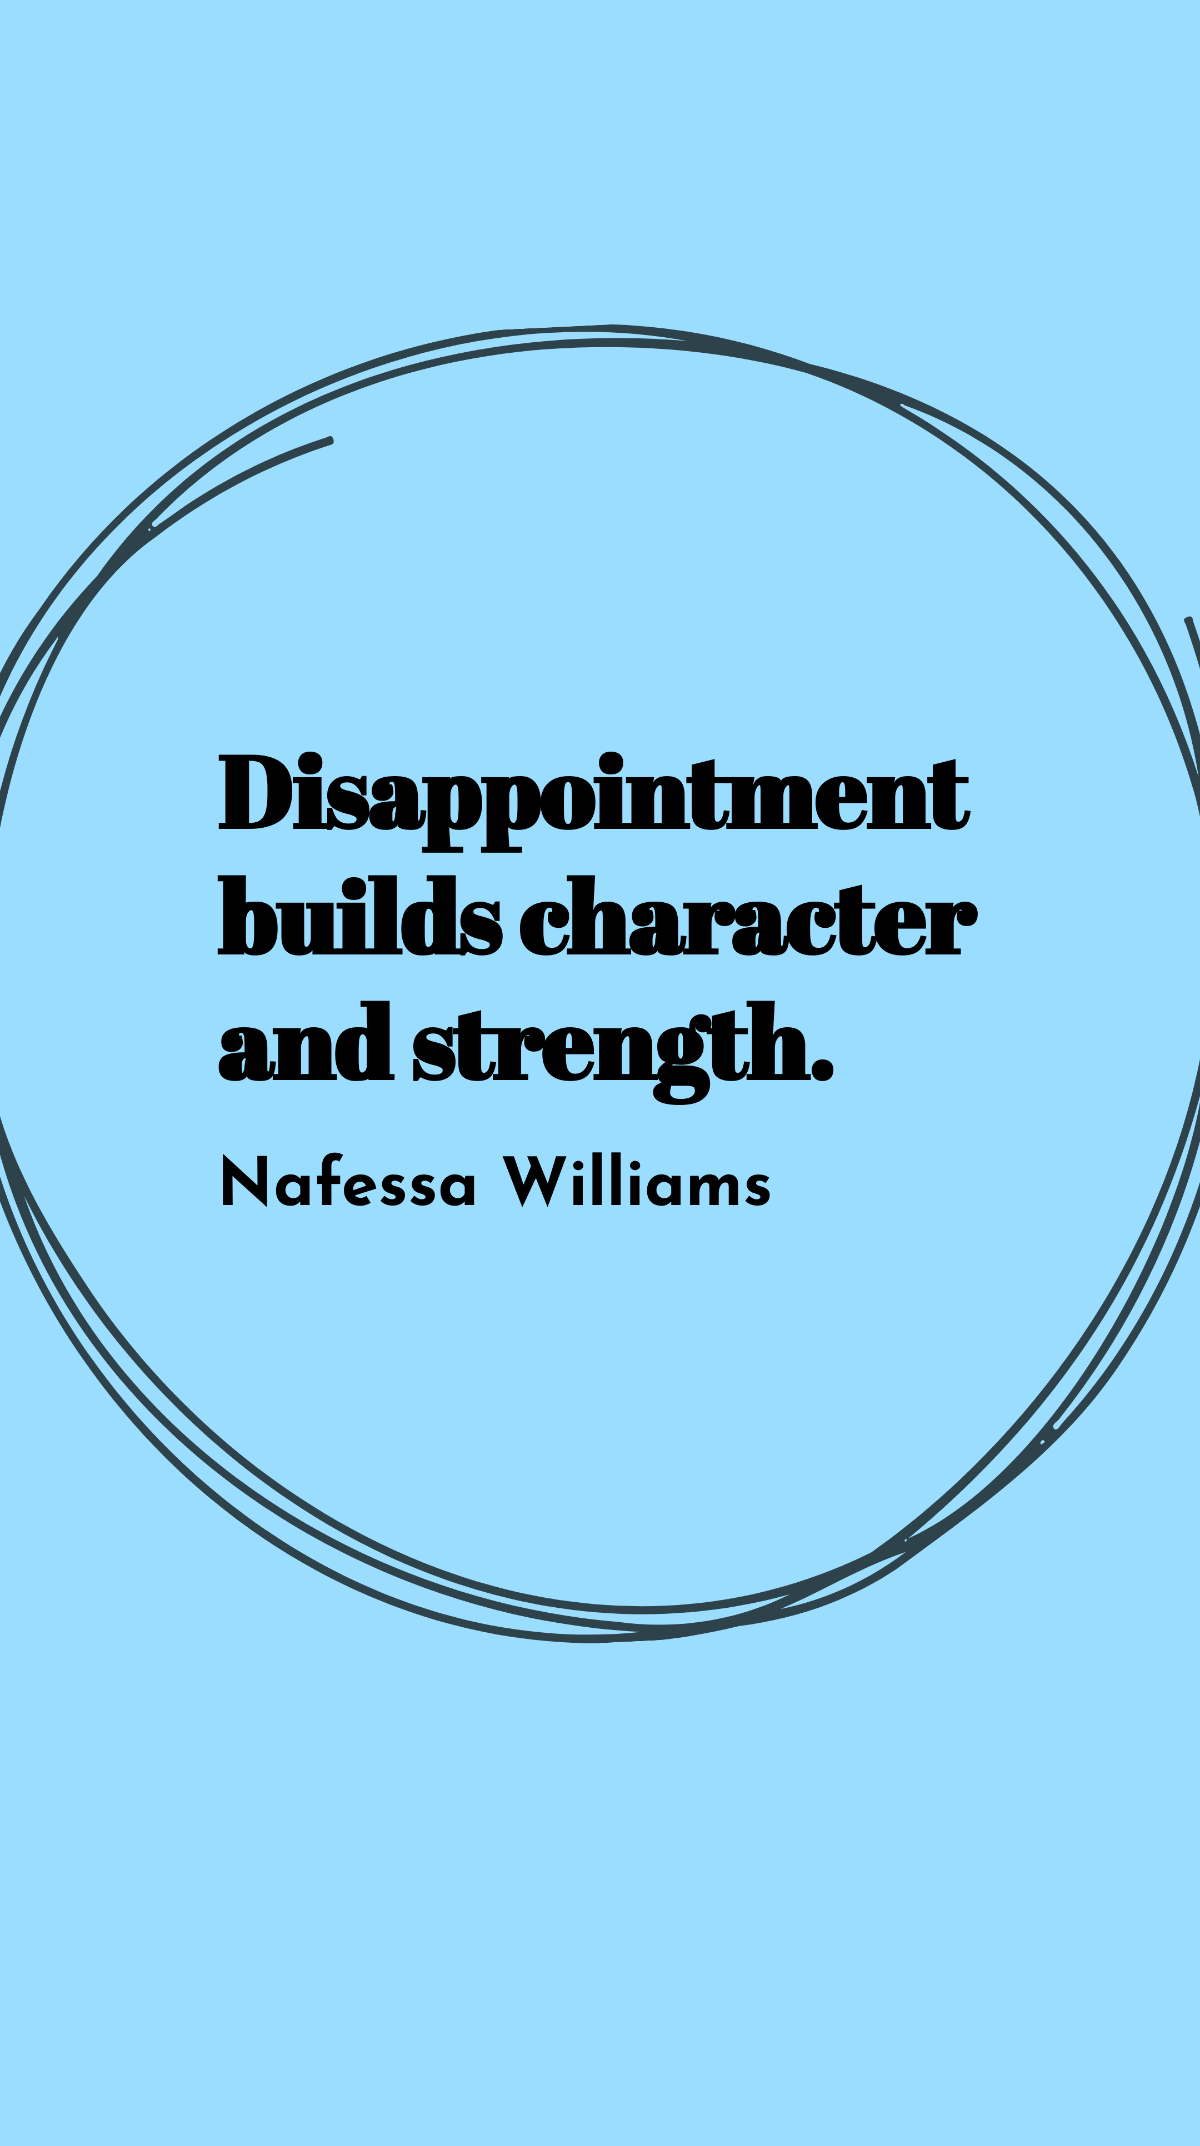 Nafessa Williams - Disappointment builds character and strength. Template